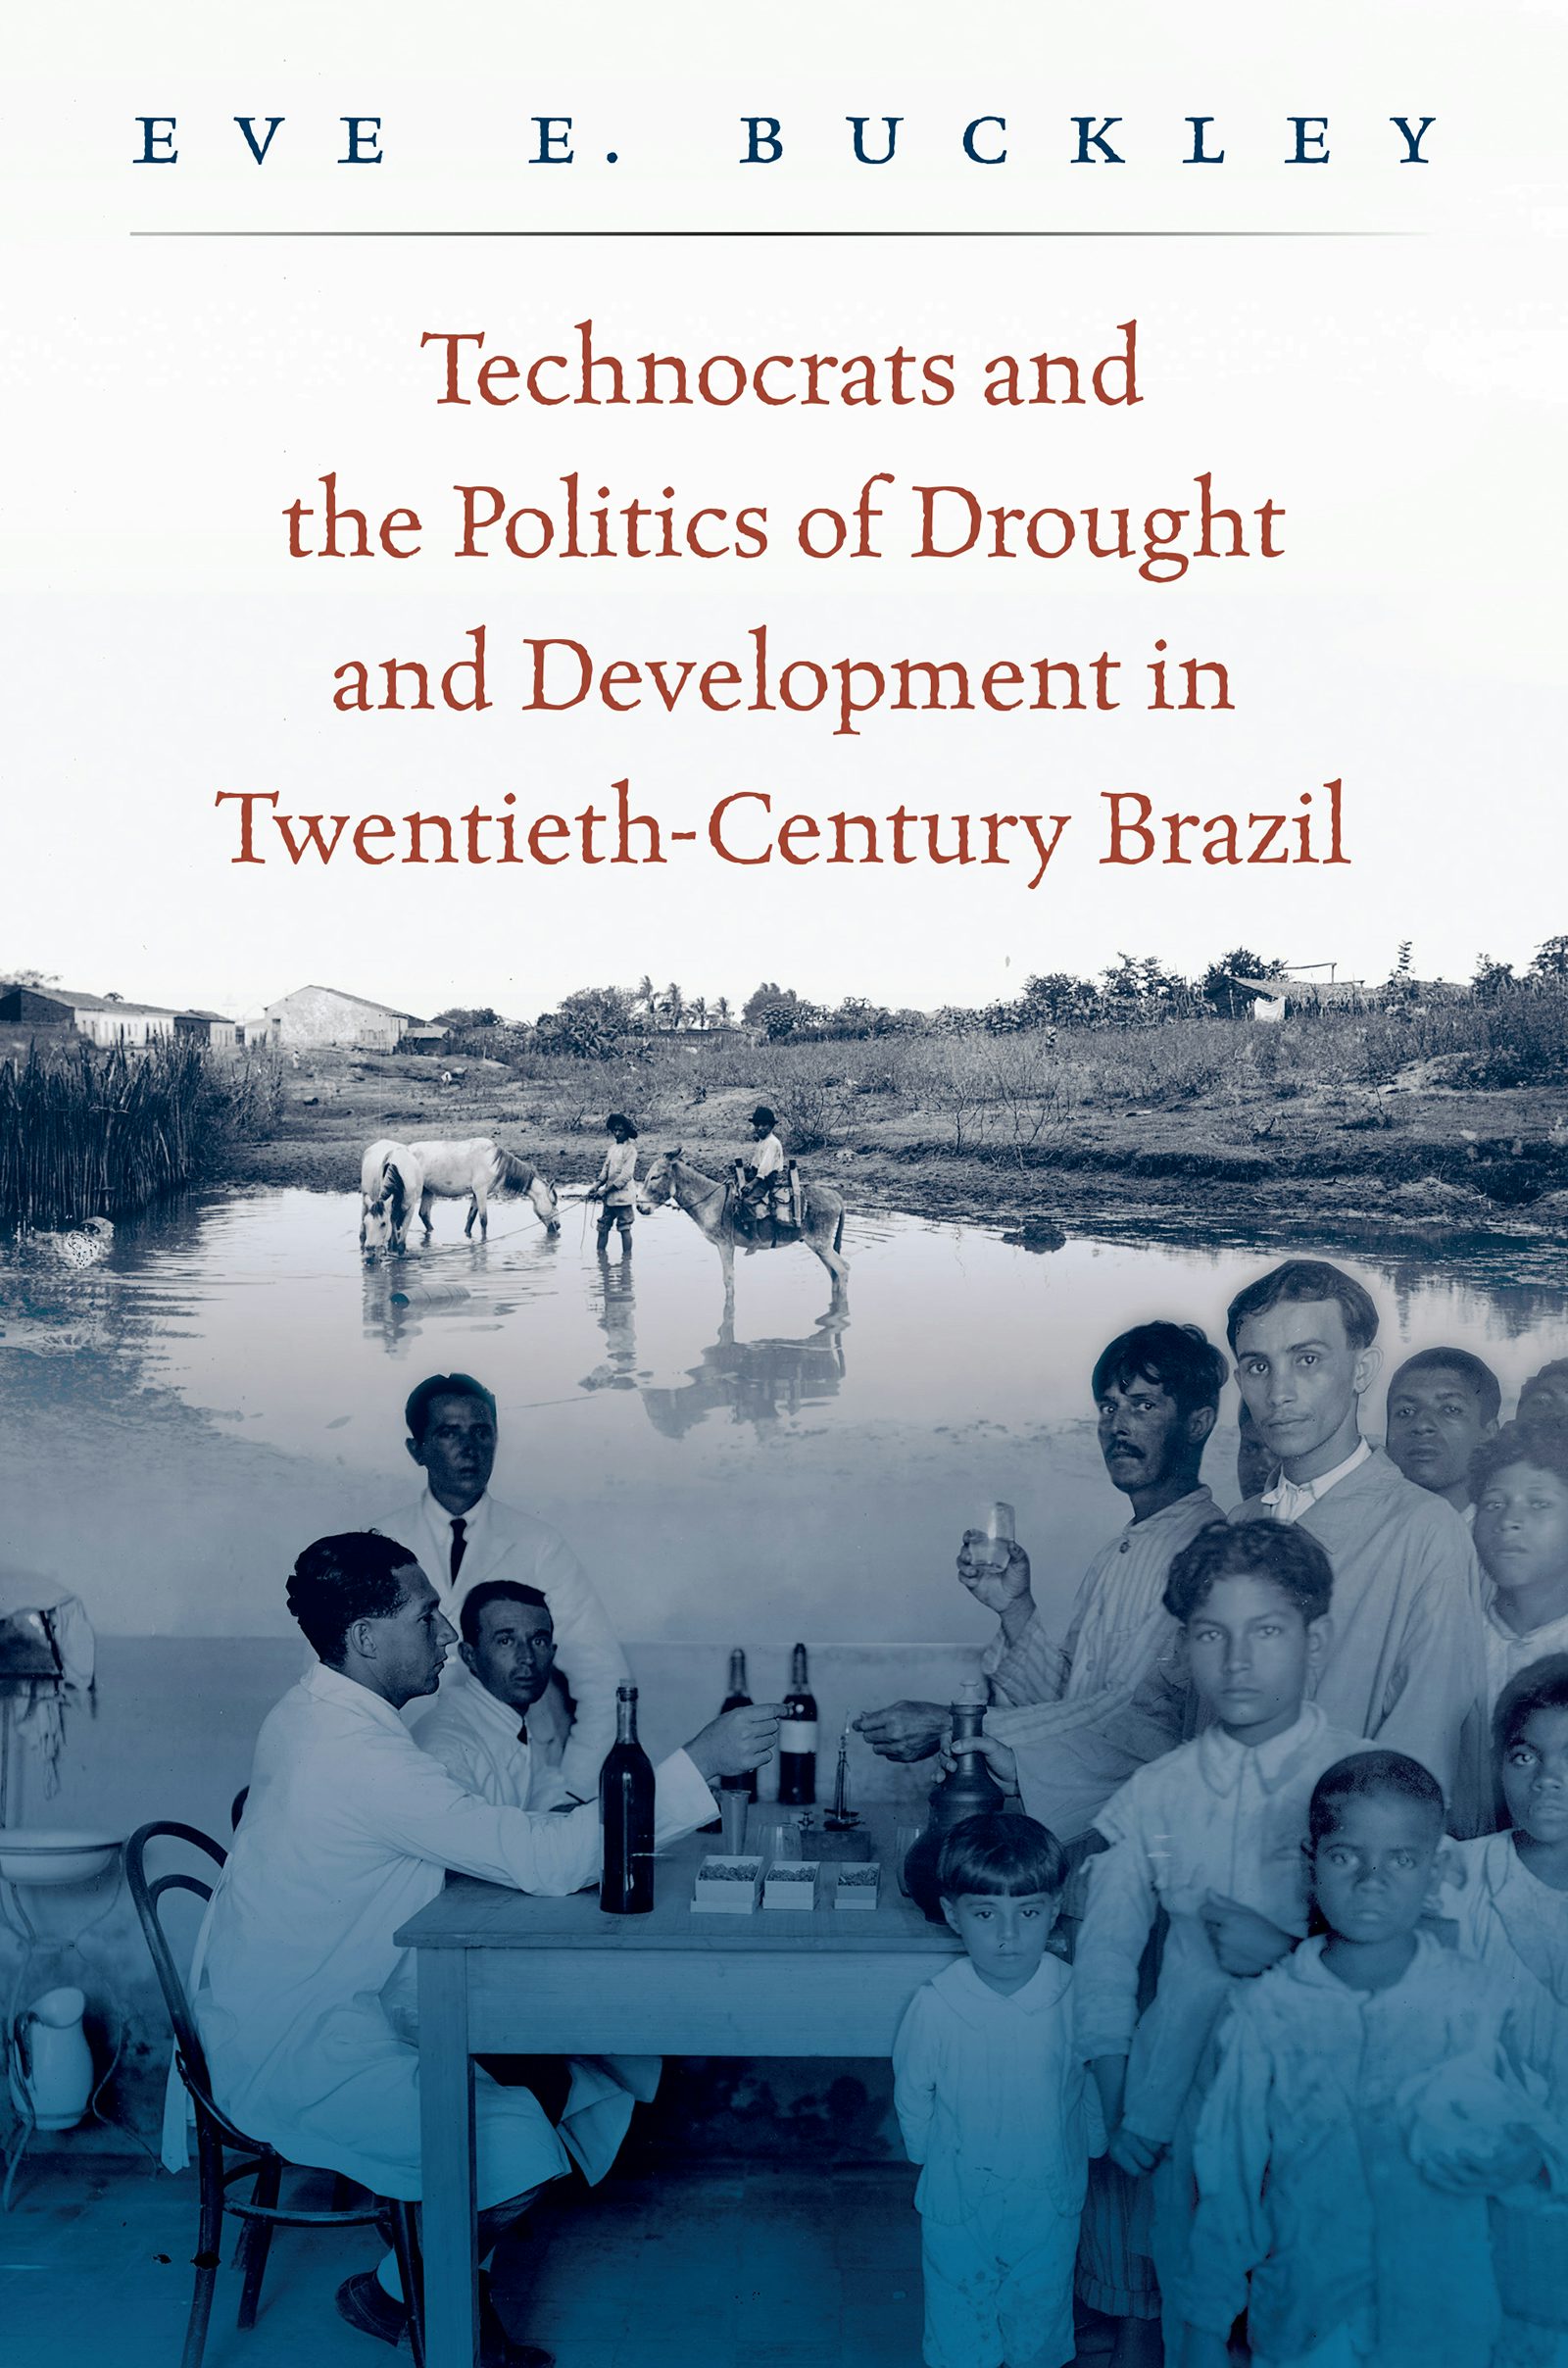 Technocrats and the Politics of Drought and Development in 